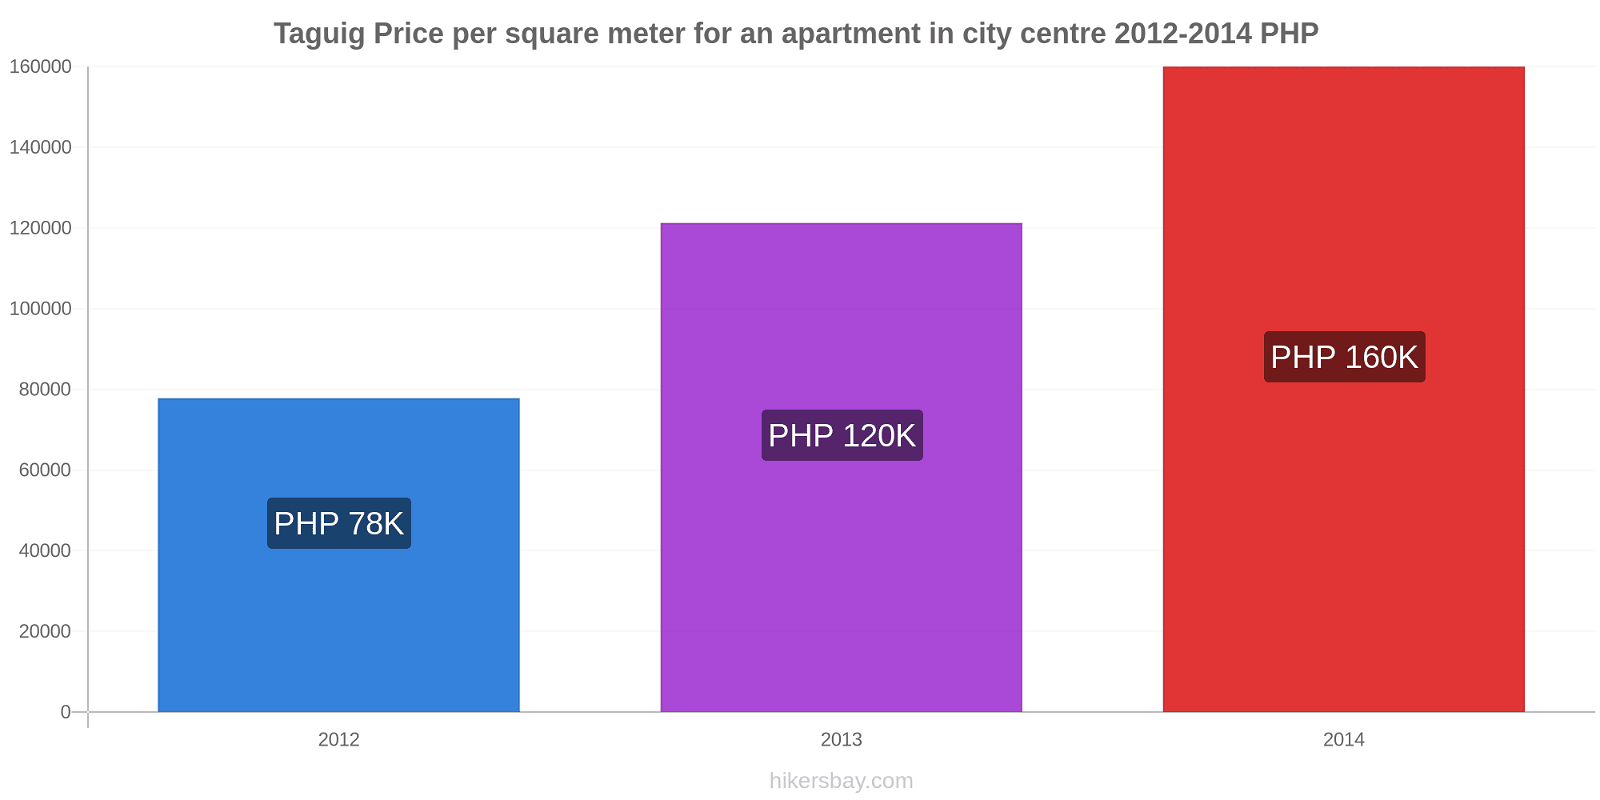 Taguig price changes Price per square meter for an apartment in city centre hikersbay.com